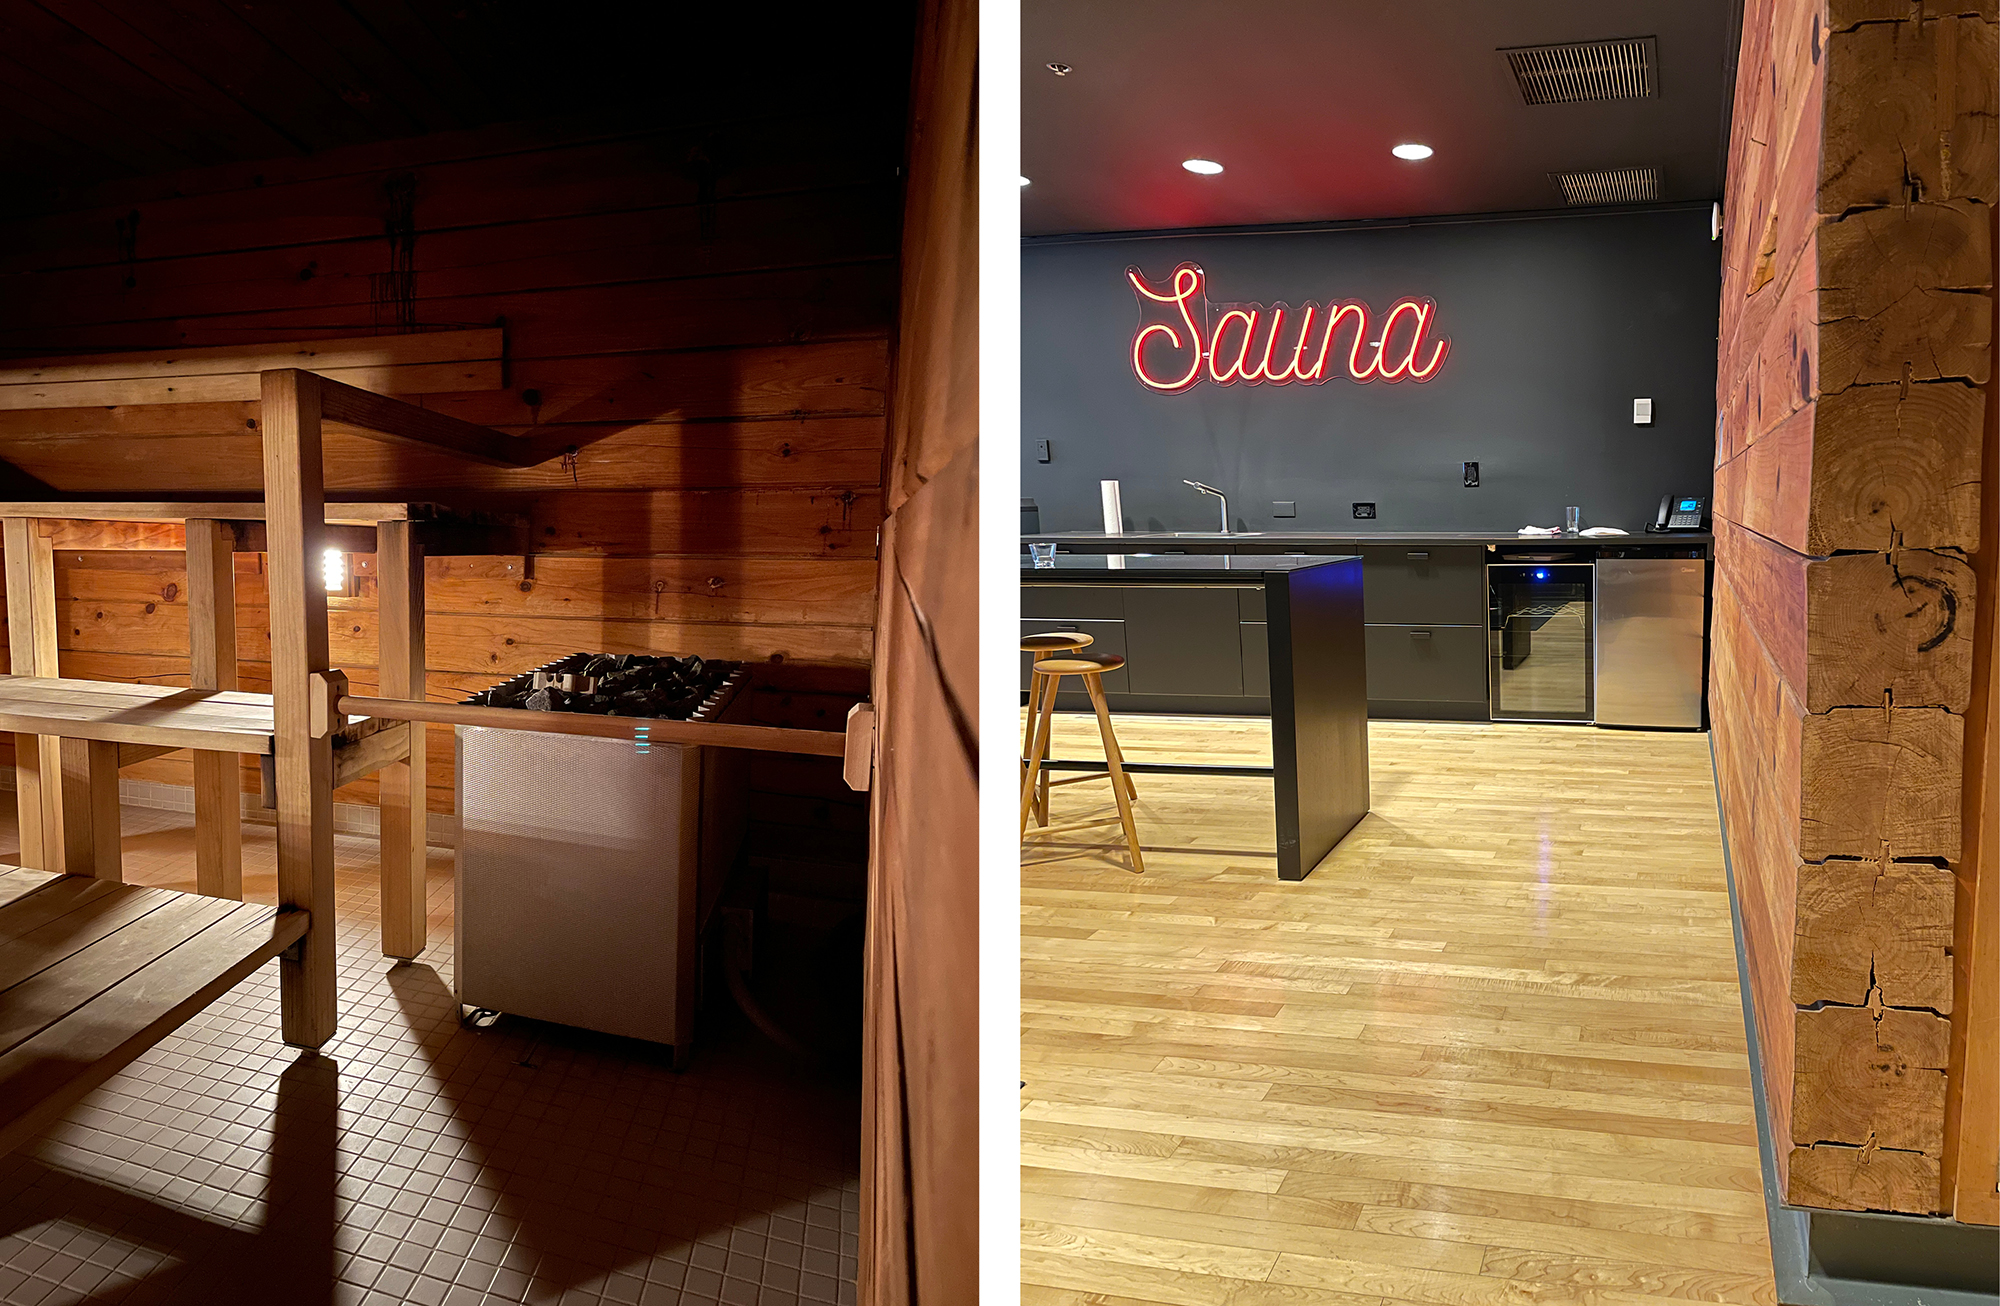 The Finnish Embassy’s long-running sauna series, which brings together journalists and Hill staffers.